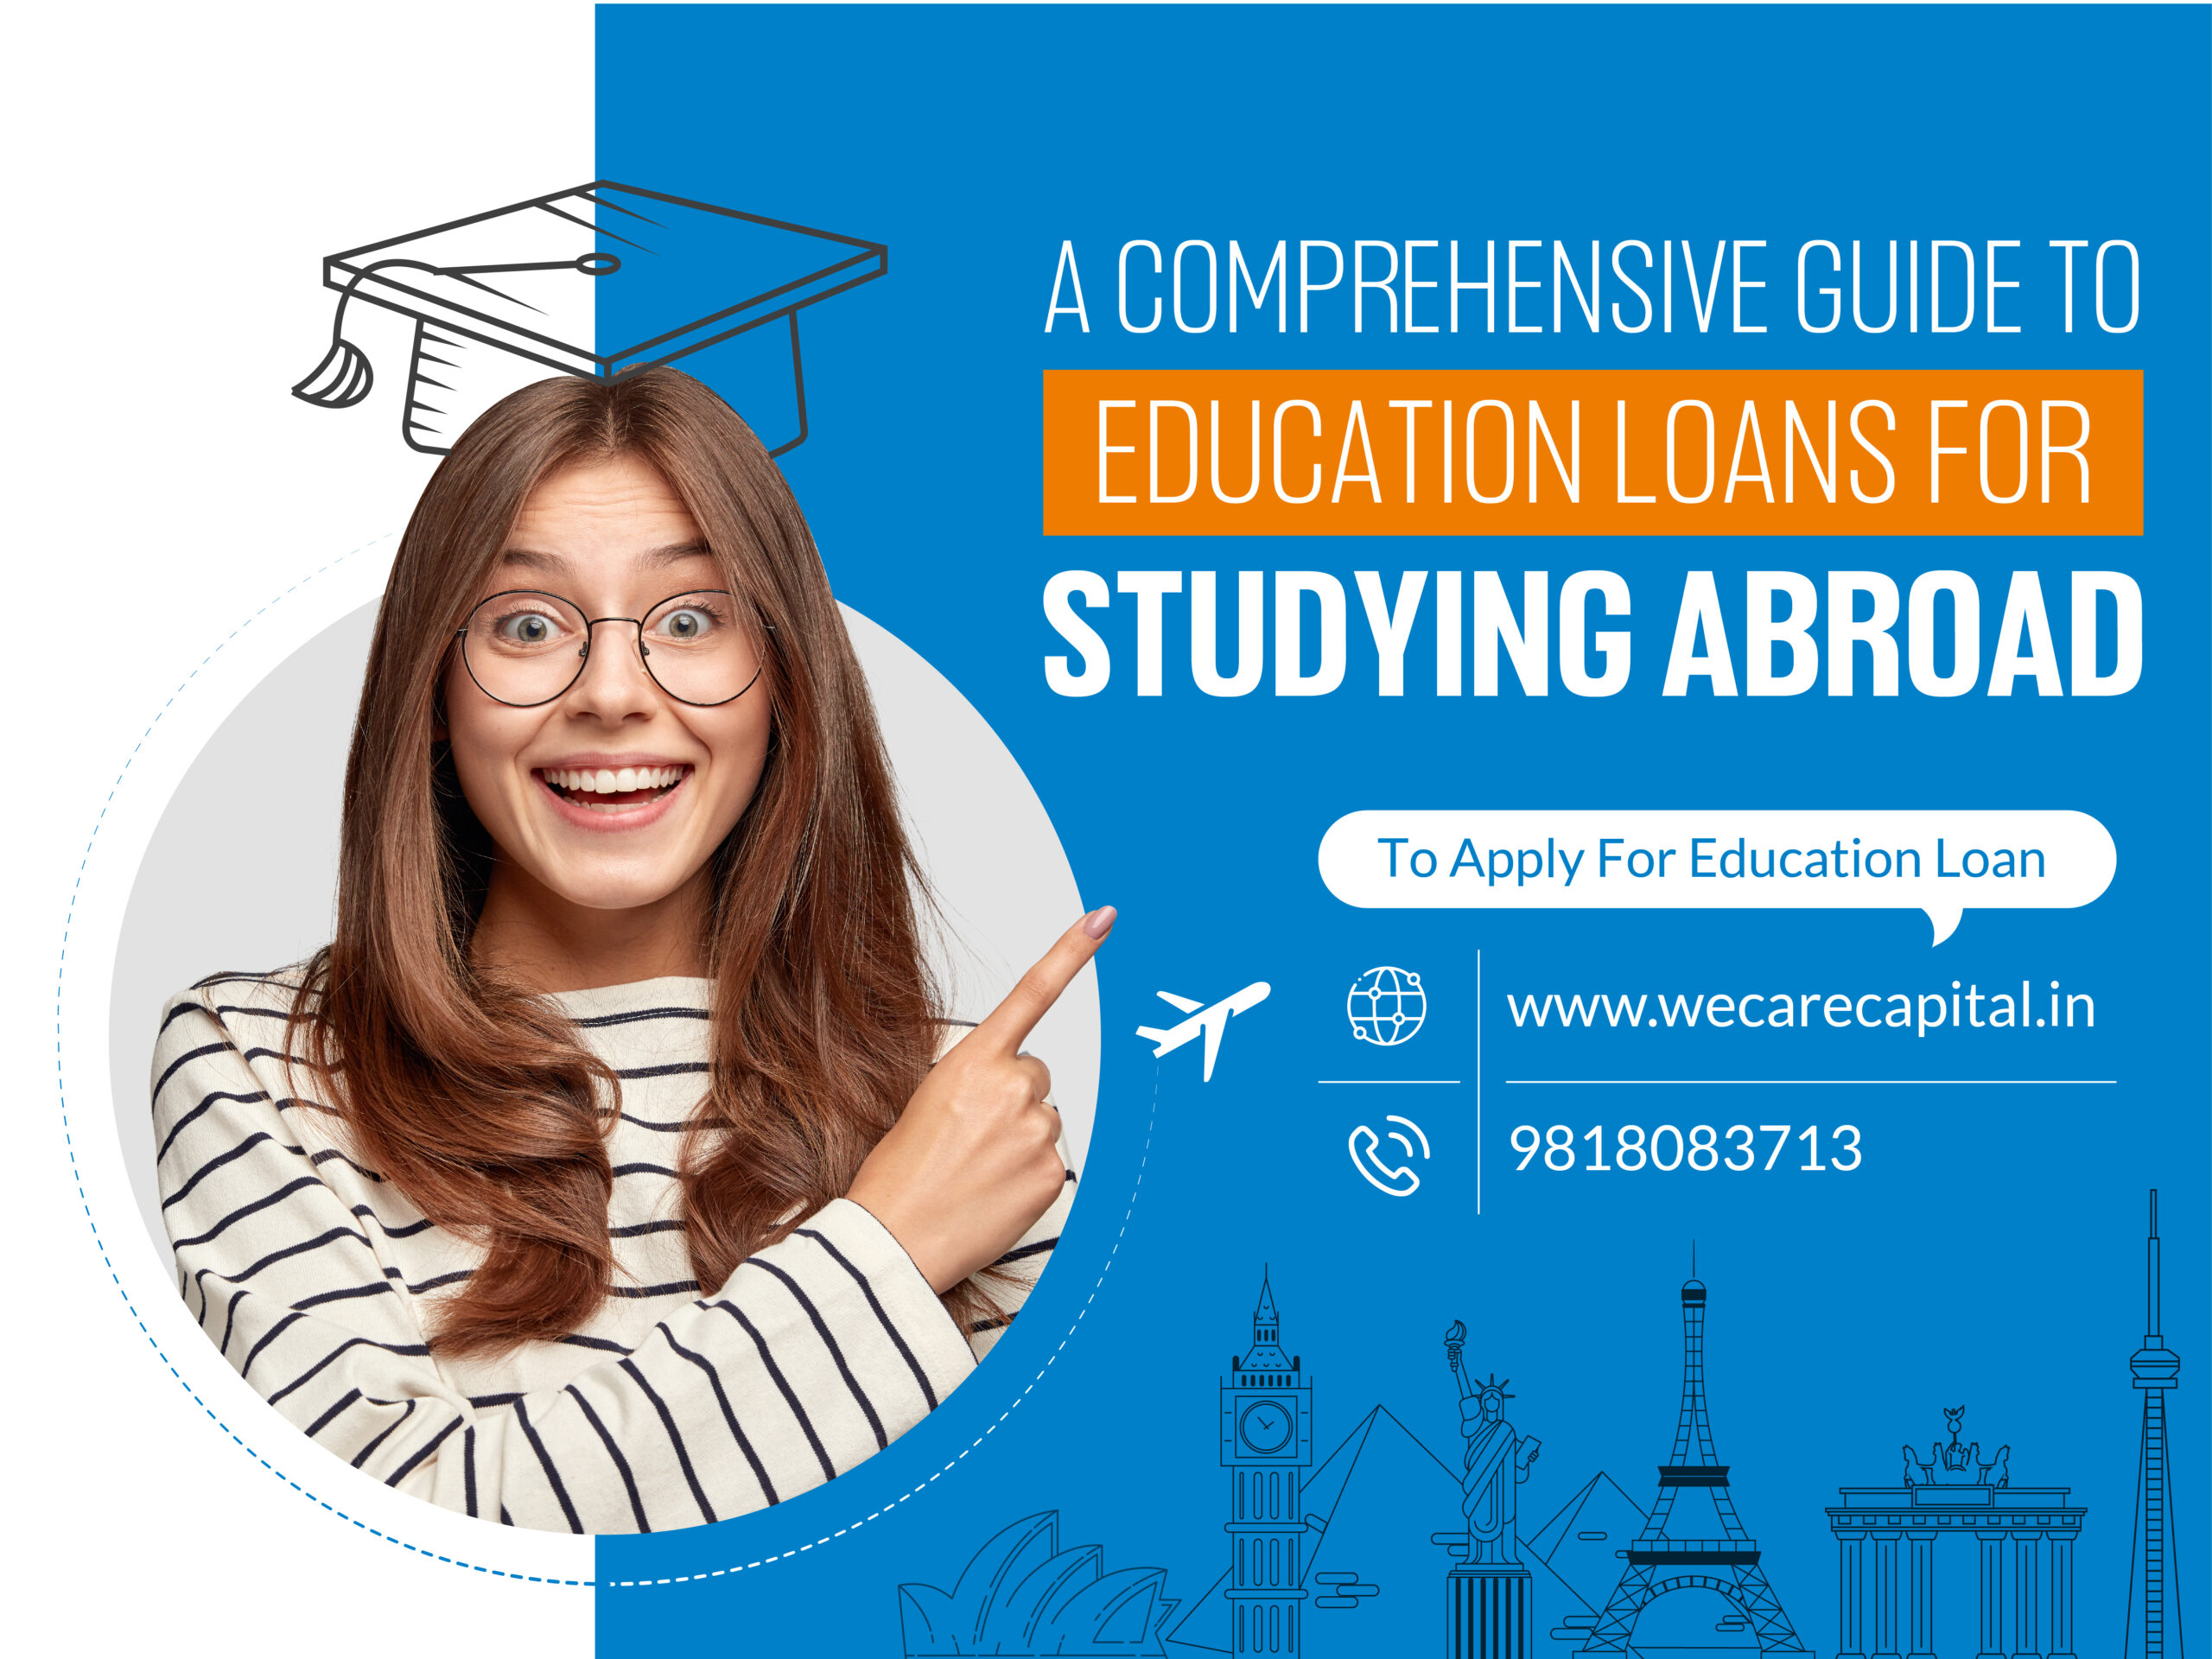 “A Comprehensive Guide To Education Loans For Studying Abroad”